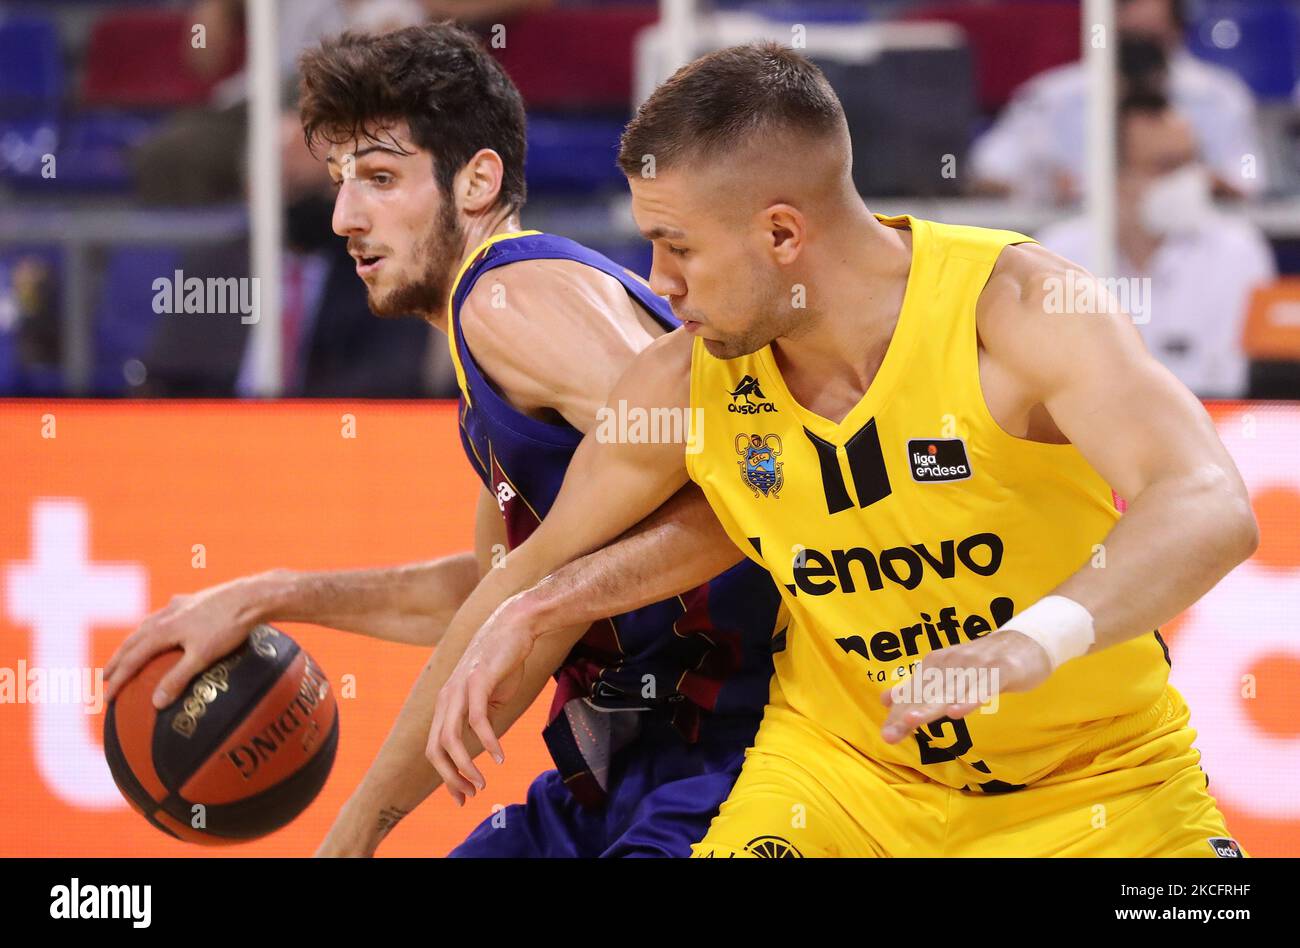 Emir Sulejmanovic and Leandro Bolmaro during the match between FC Barcelona and Lenovo Tenerife, corresponding to the 1st match of semifinal the play off of the Liga Endesa, played at the Palau Blaugrana, on 07th June 2021, in Barcelona, Spain. -- (Photo by Urbanandsport/NurPhoto) Stock Photo